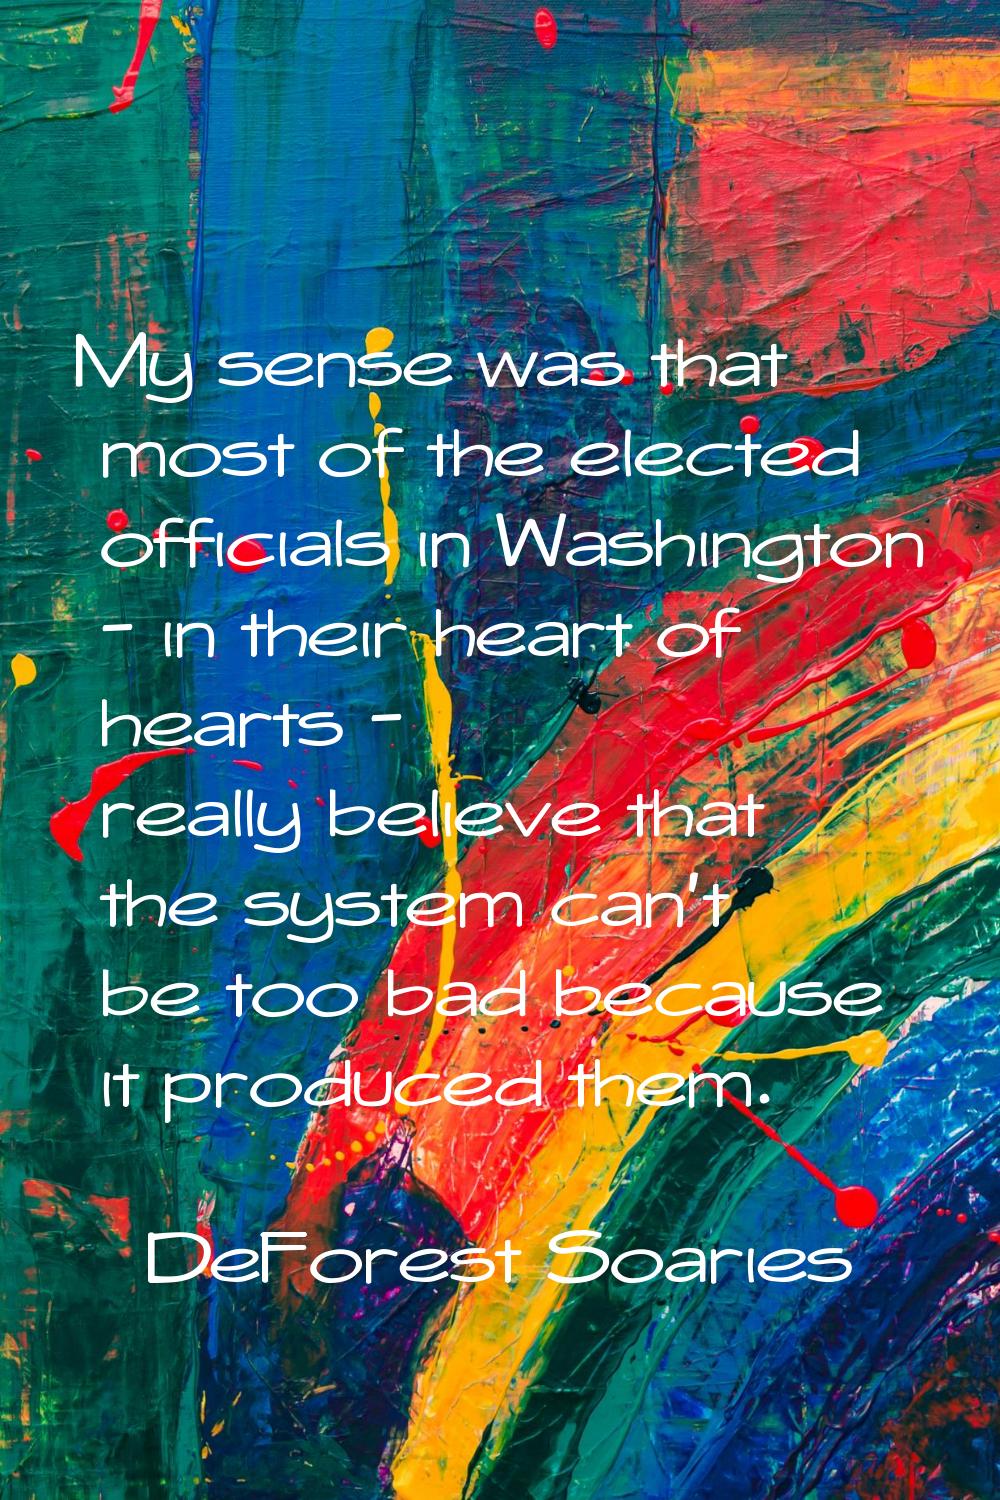 My sense was that most of the elected officials in Washington - in their heart of hearts - really b